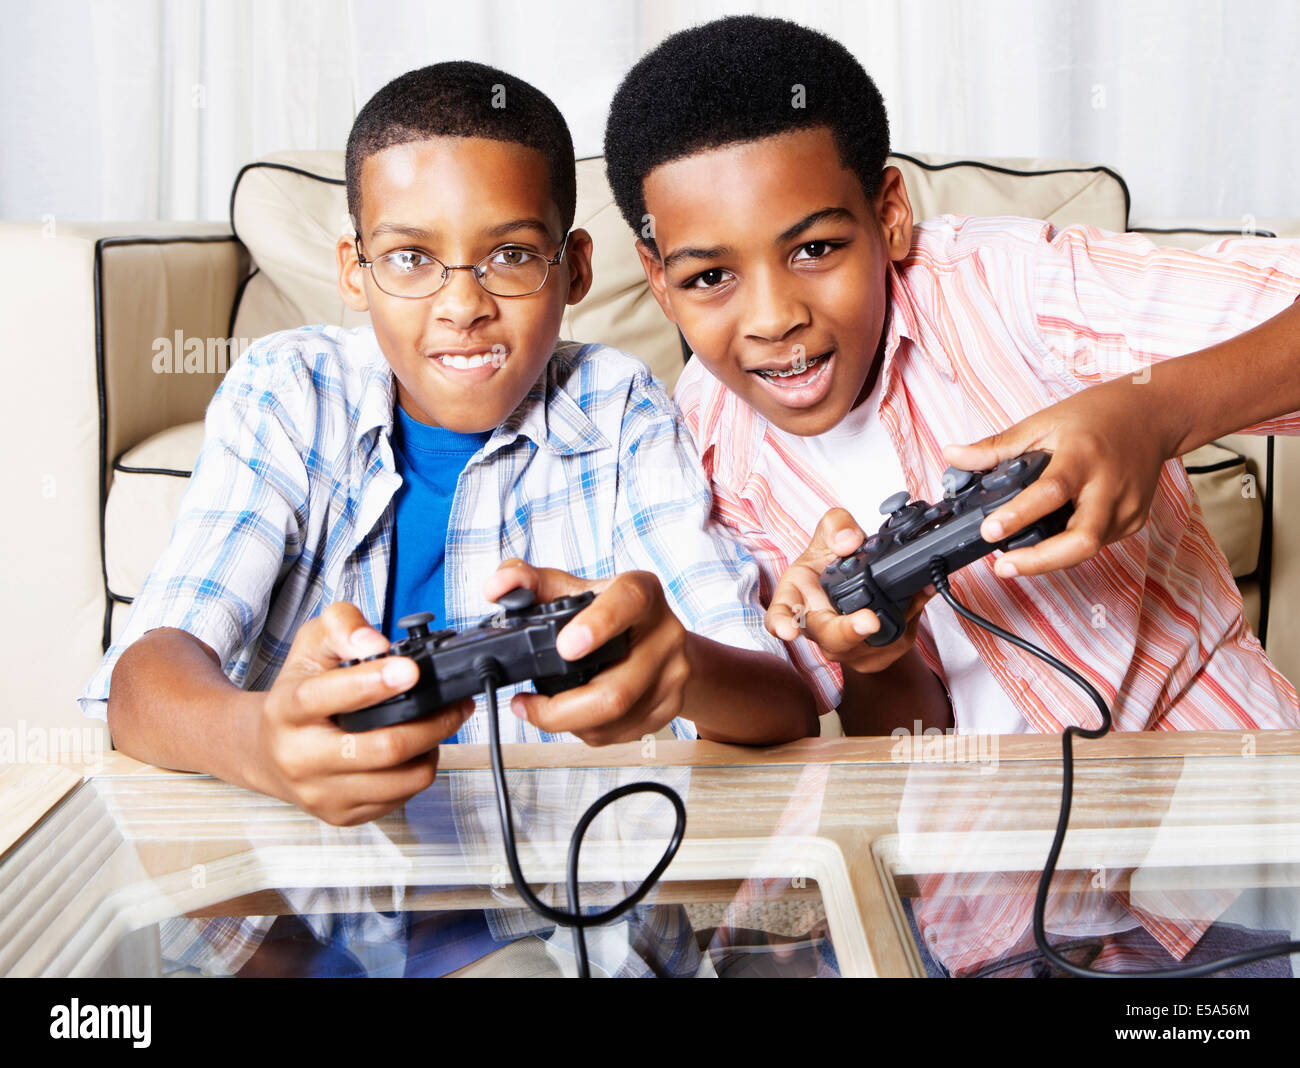 Mixed race boys playing video games Stock Photo